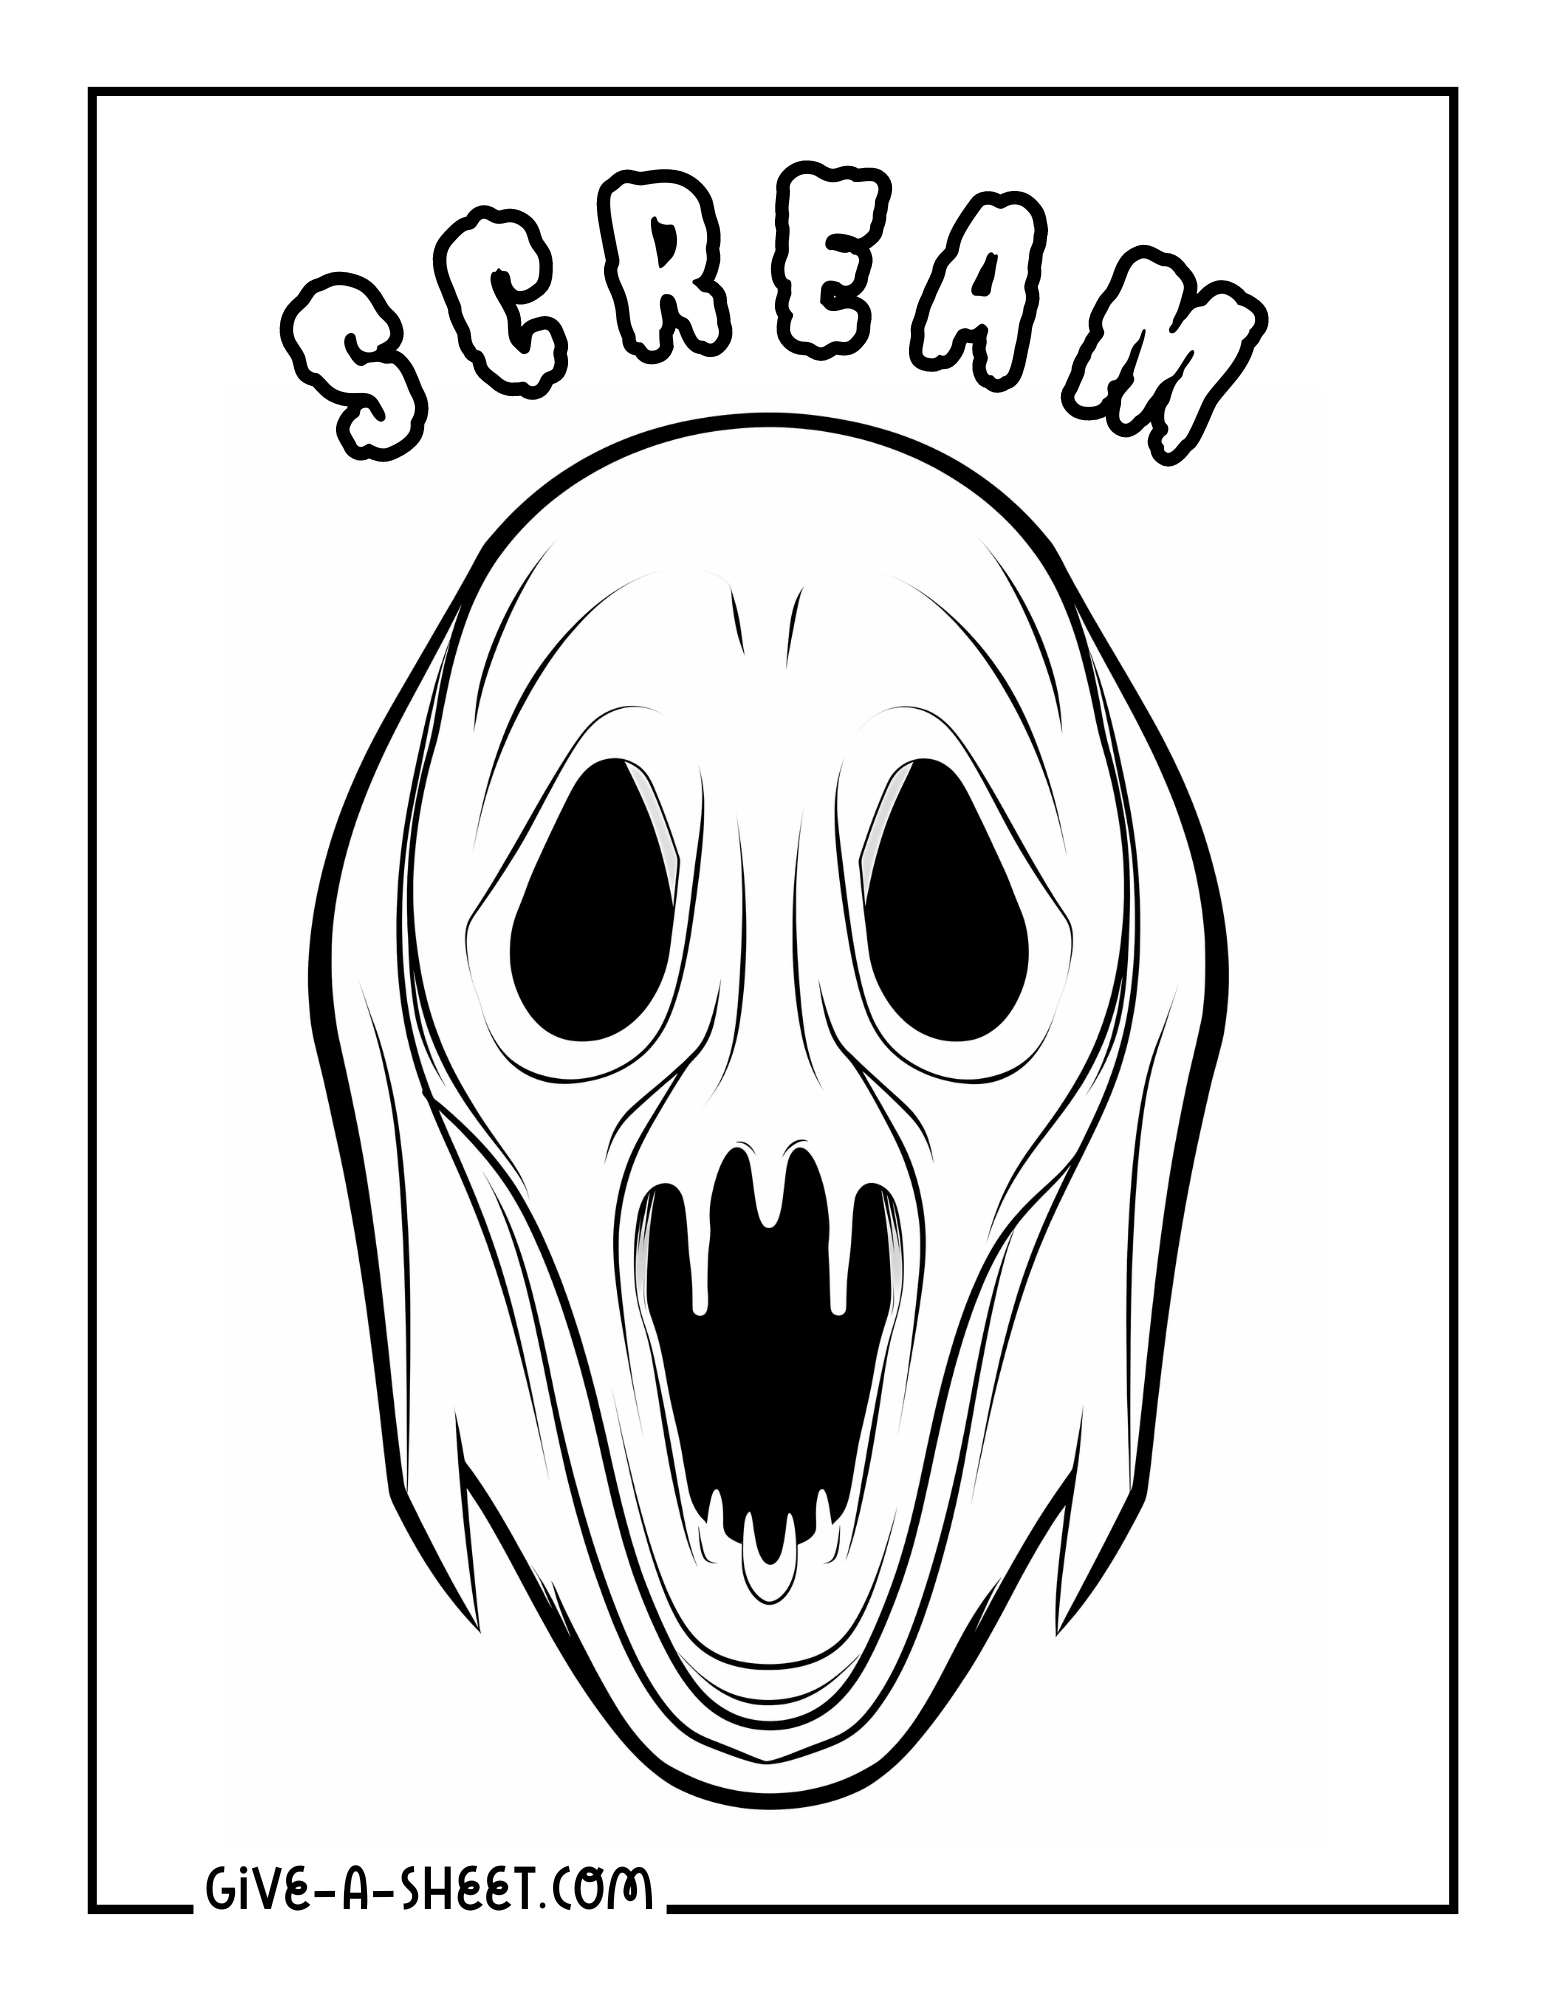 Scream scary movies illustration coloring page.